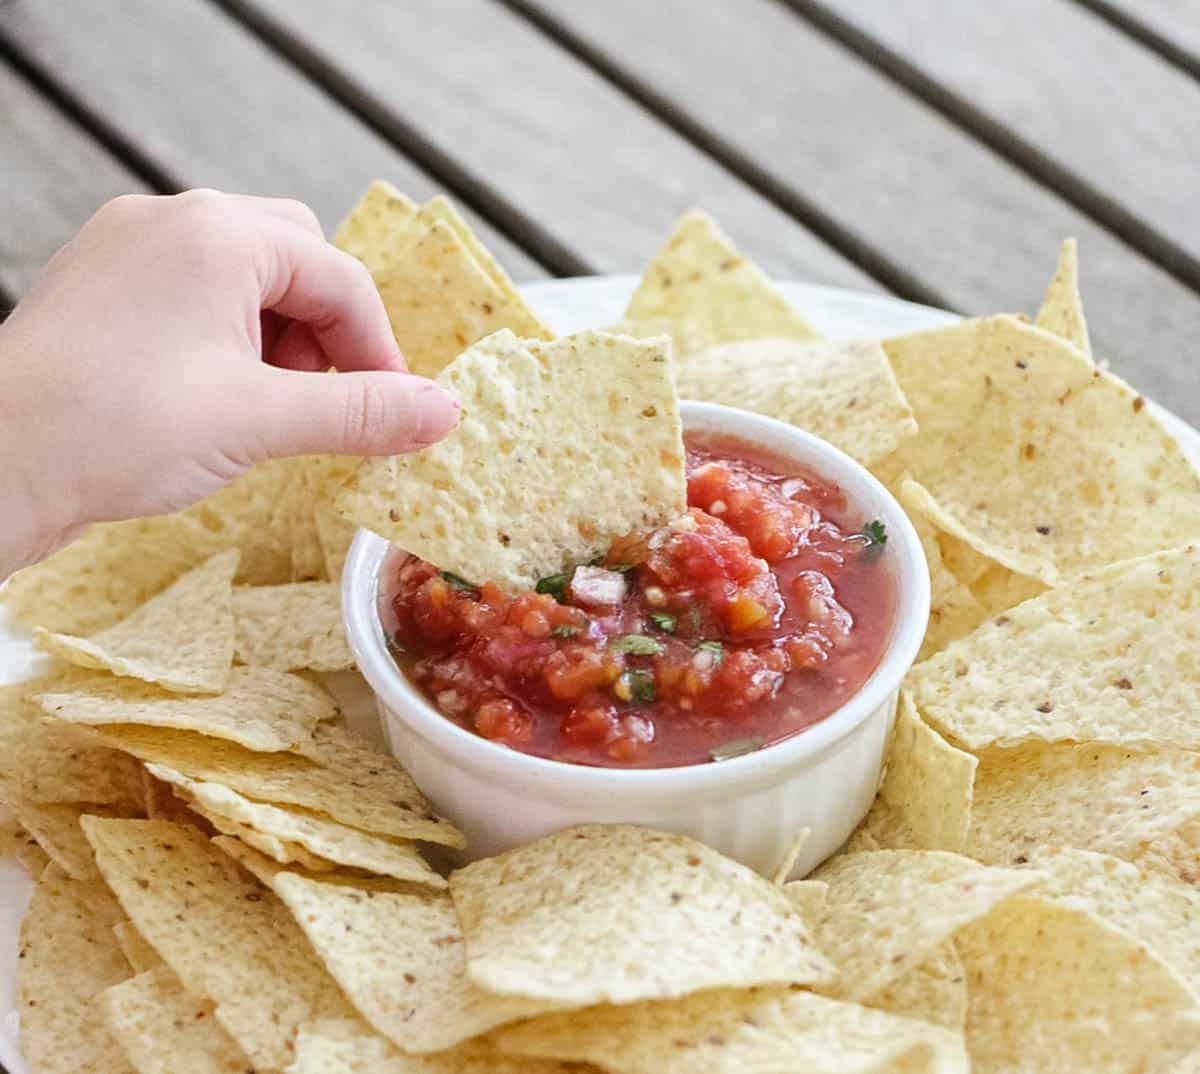 hand dipping a chip into homemade salsa recipe with canned diced tomatoes in a bowl with a plate of chips.